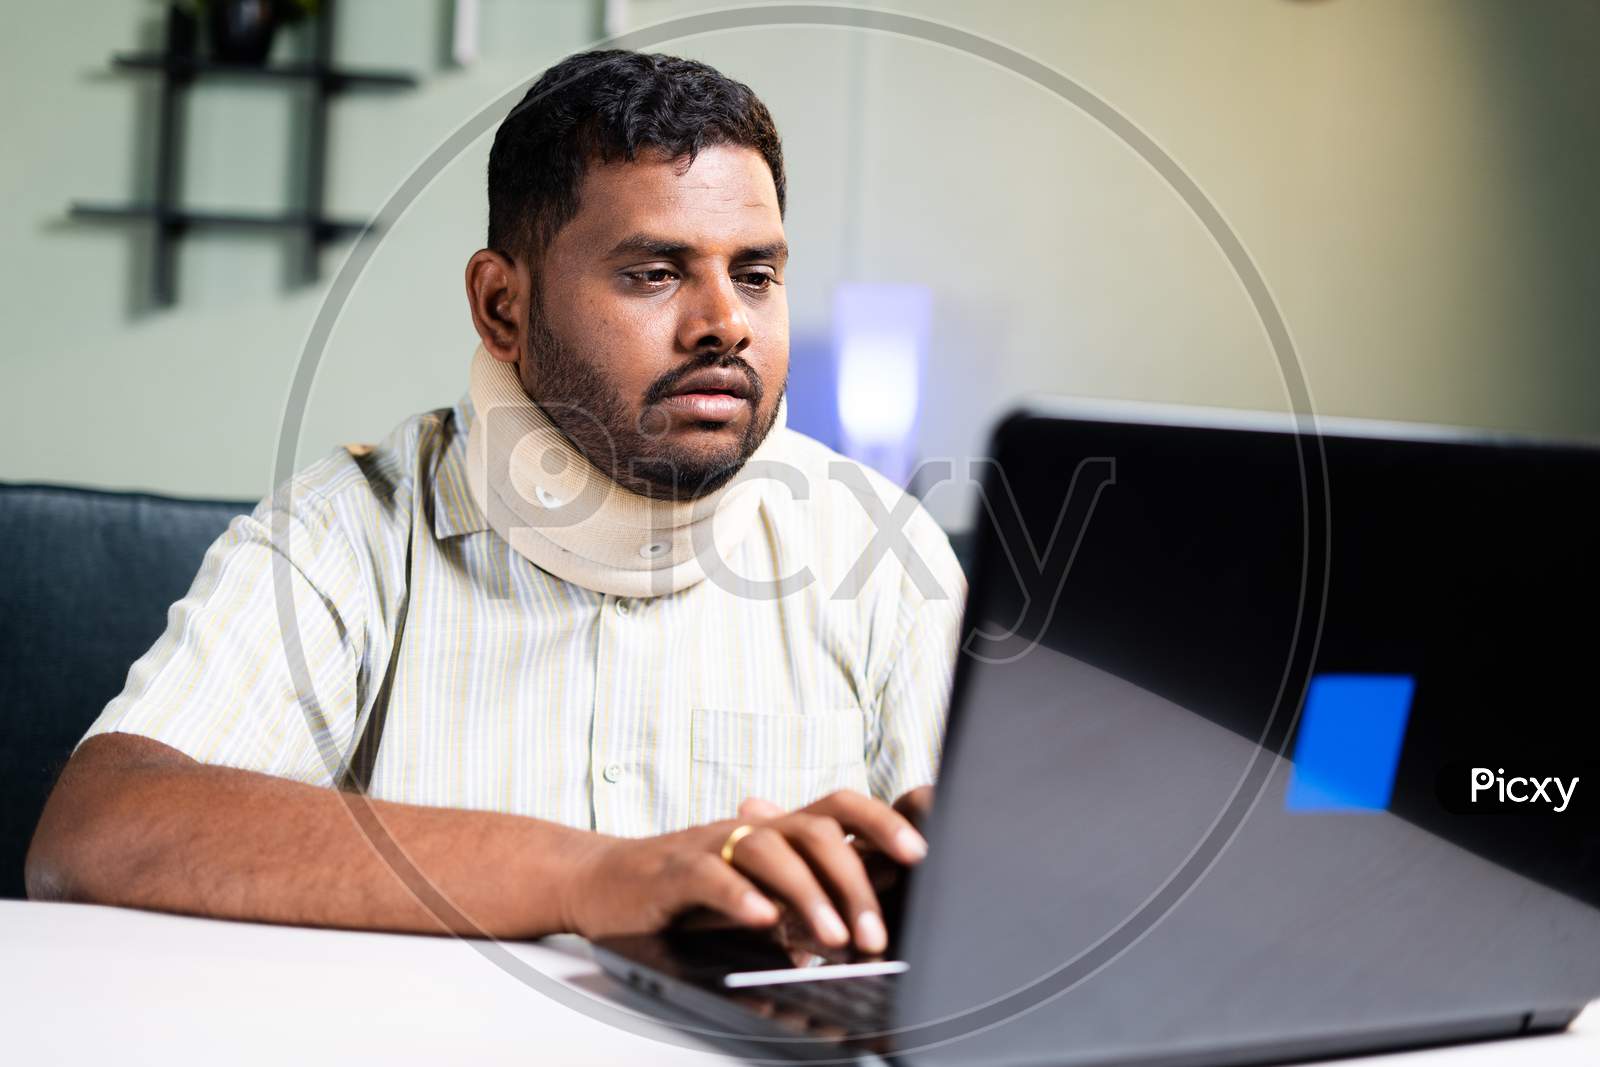 Fat Man With Neck Brace Working On Laptop Due To Neck Pain During Work From Home - Concept Of Overworking And Unhealthy Food Habits During Coronavirus Covid-19 Pandemic.